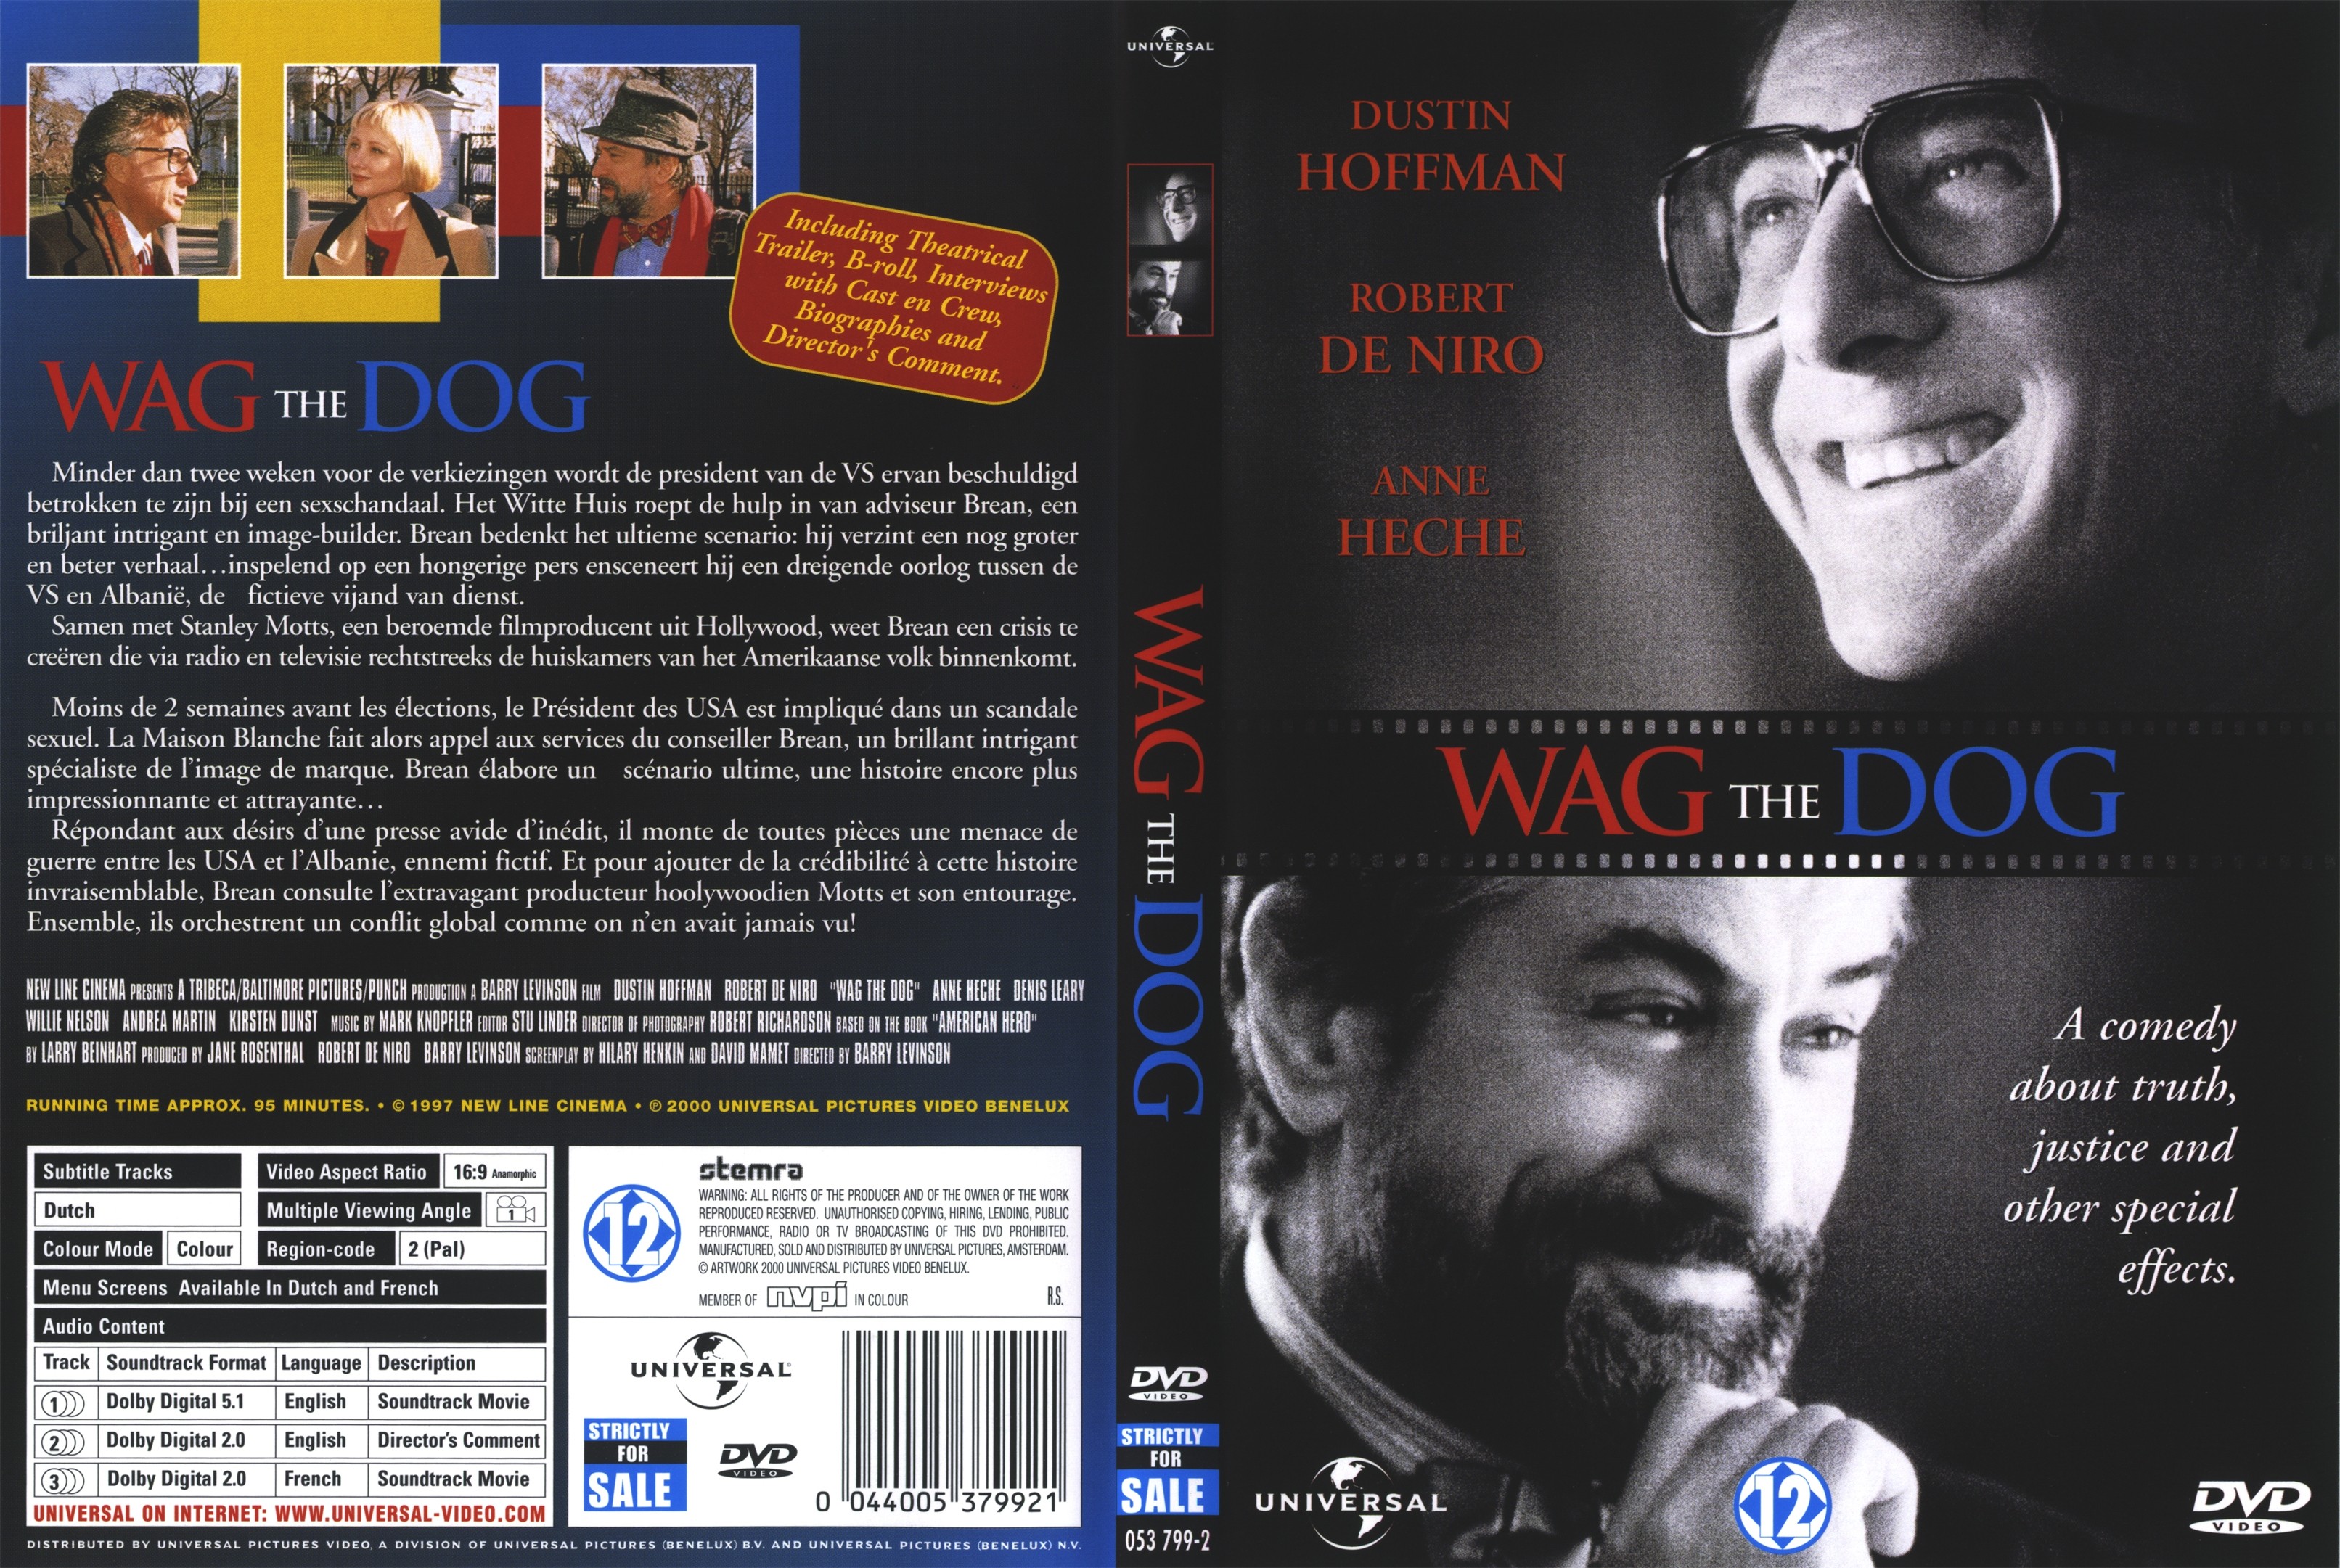 Jaquette DVD Wag the dog